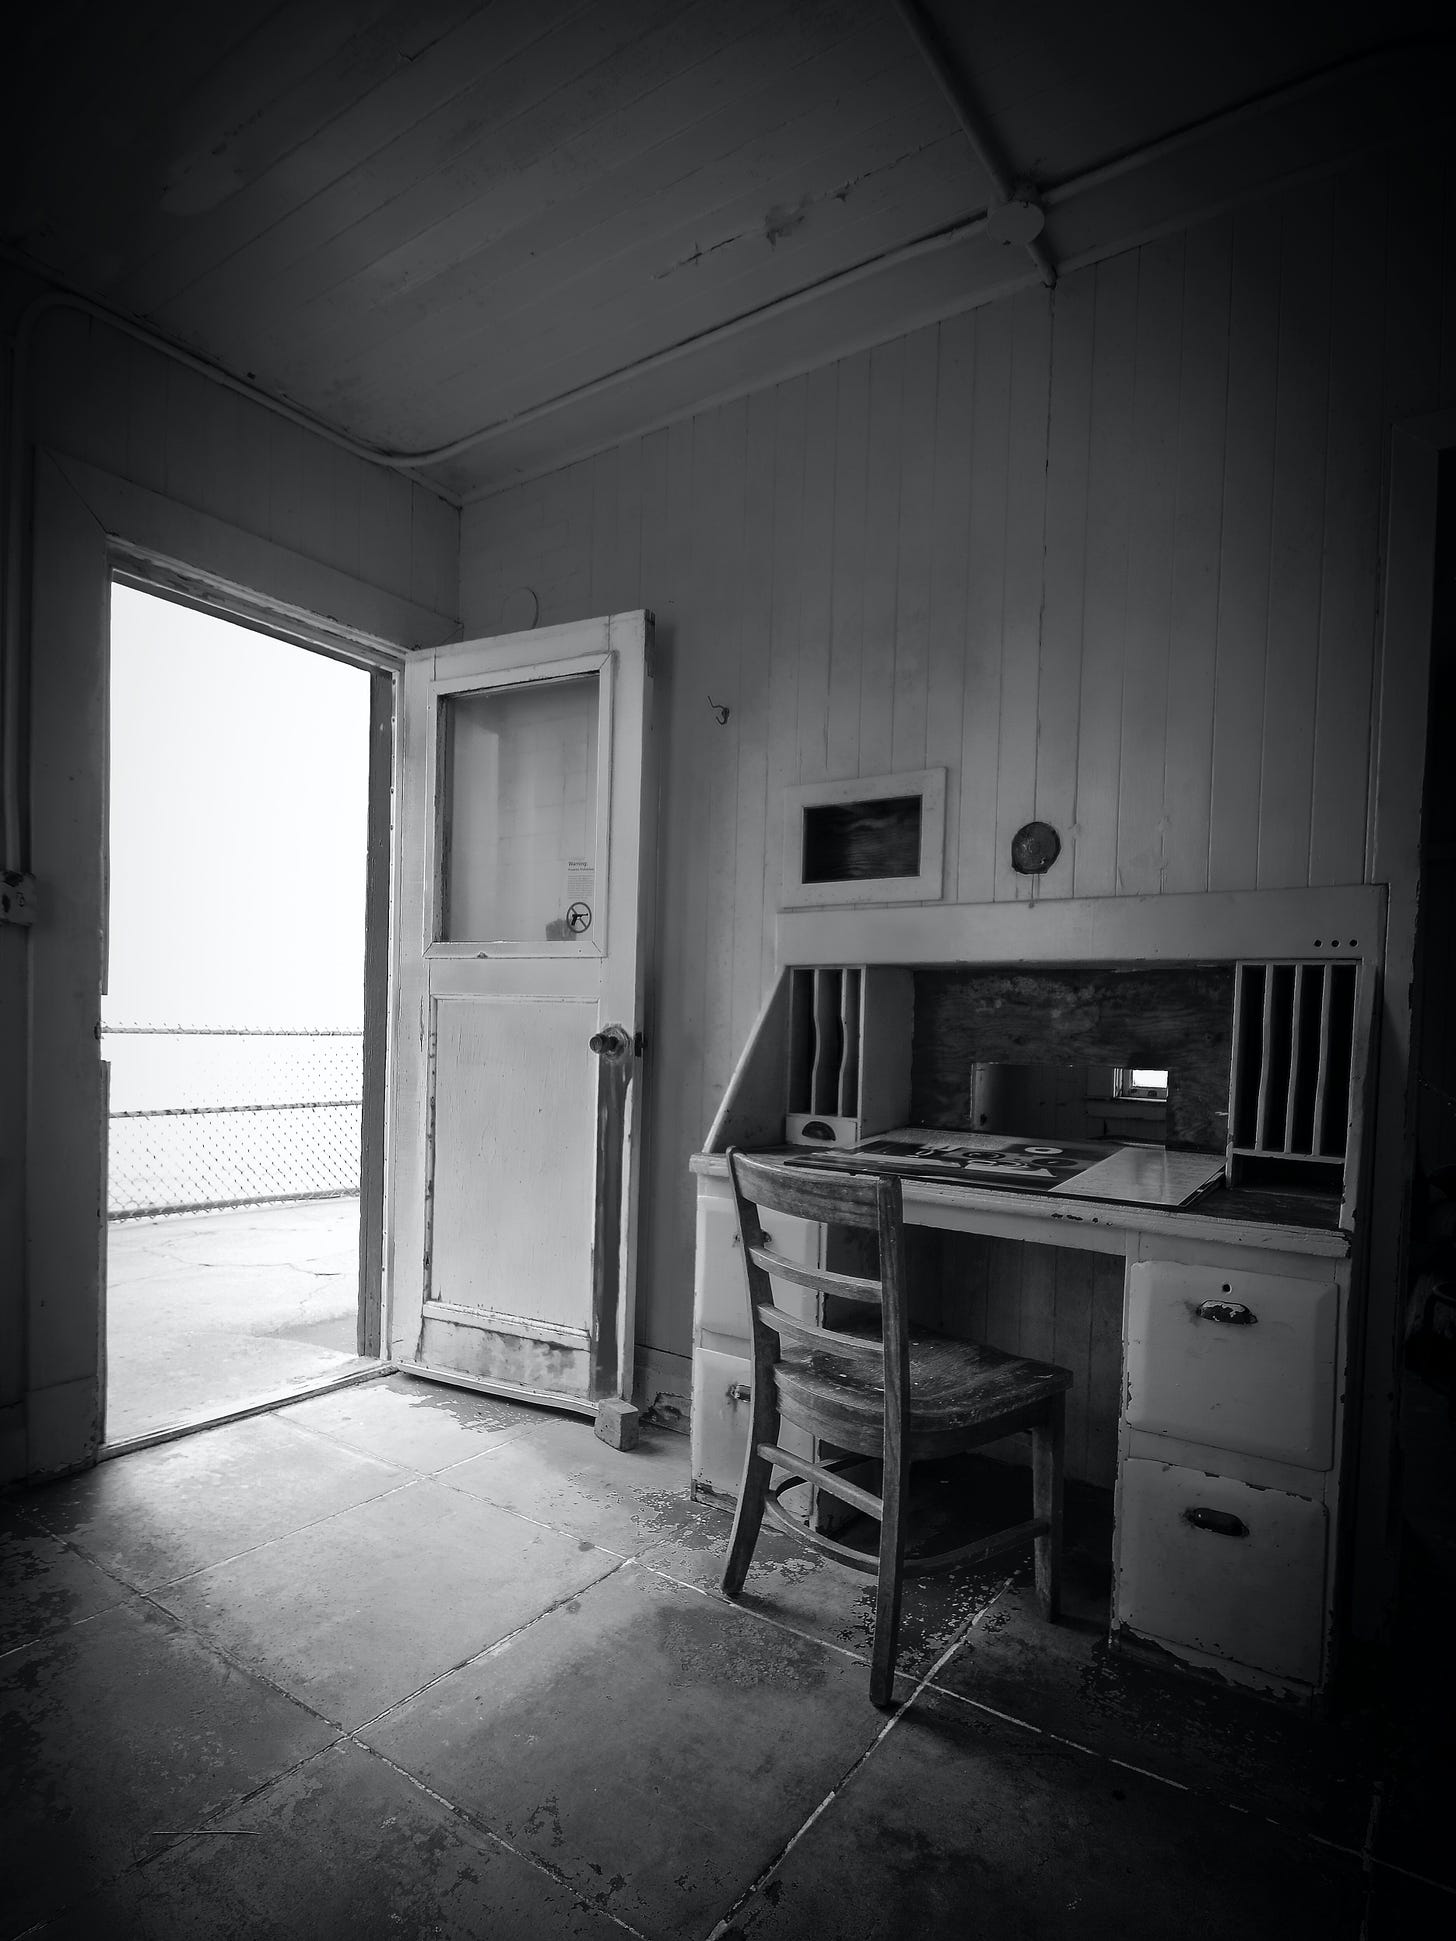 A black and white image of a vintage desk and chair in an abandoned room